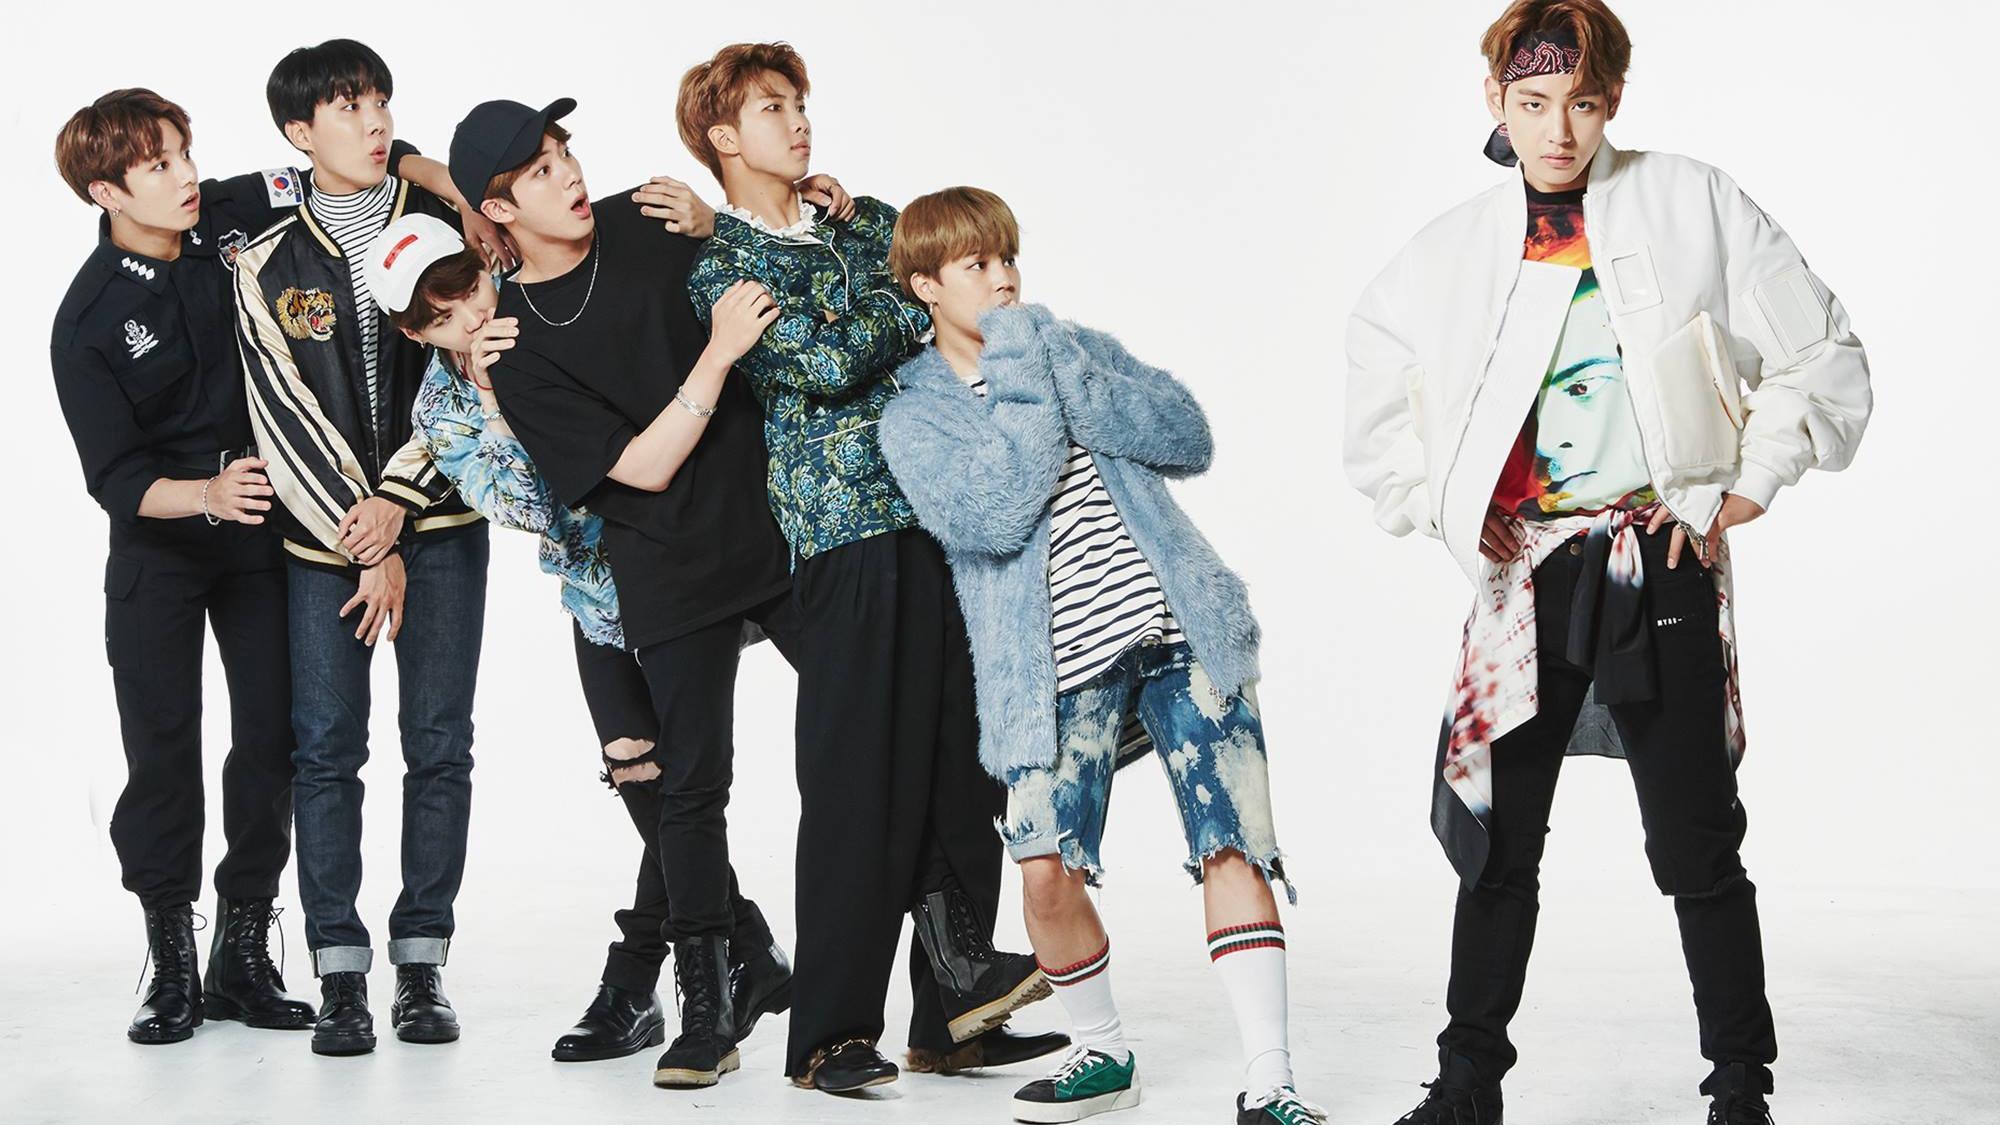 Download Bts Wallpaper, High Quality Wallpaper For Free